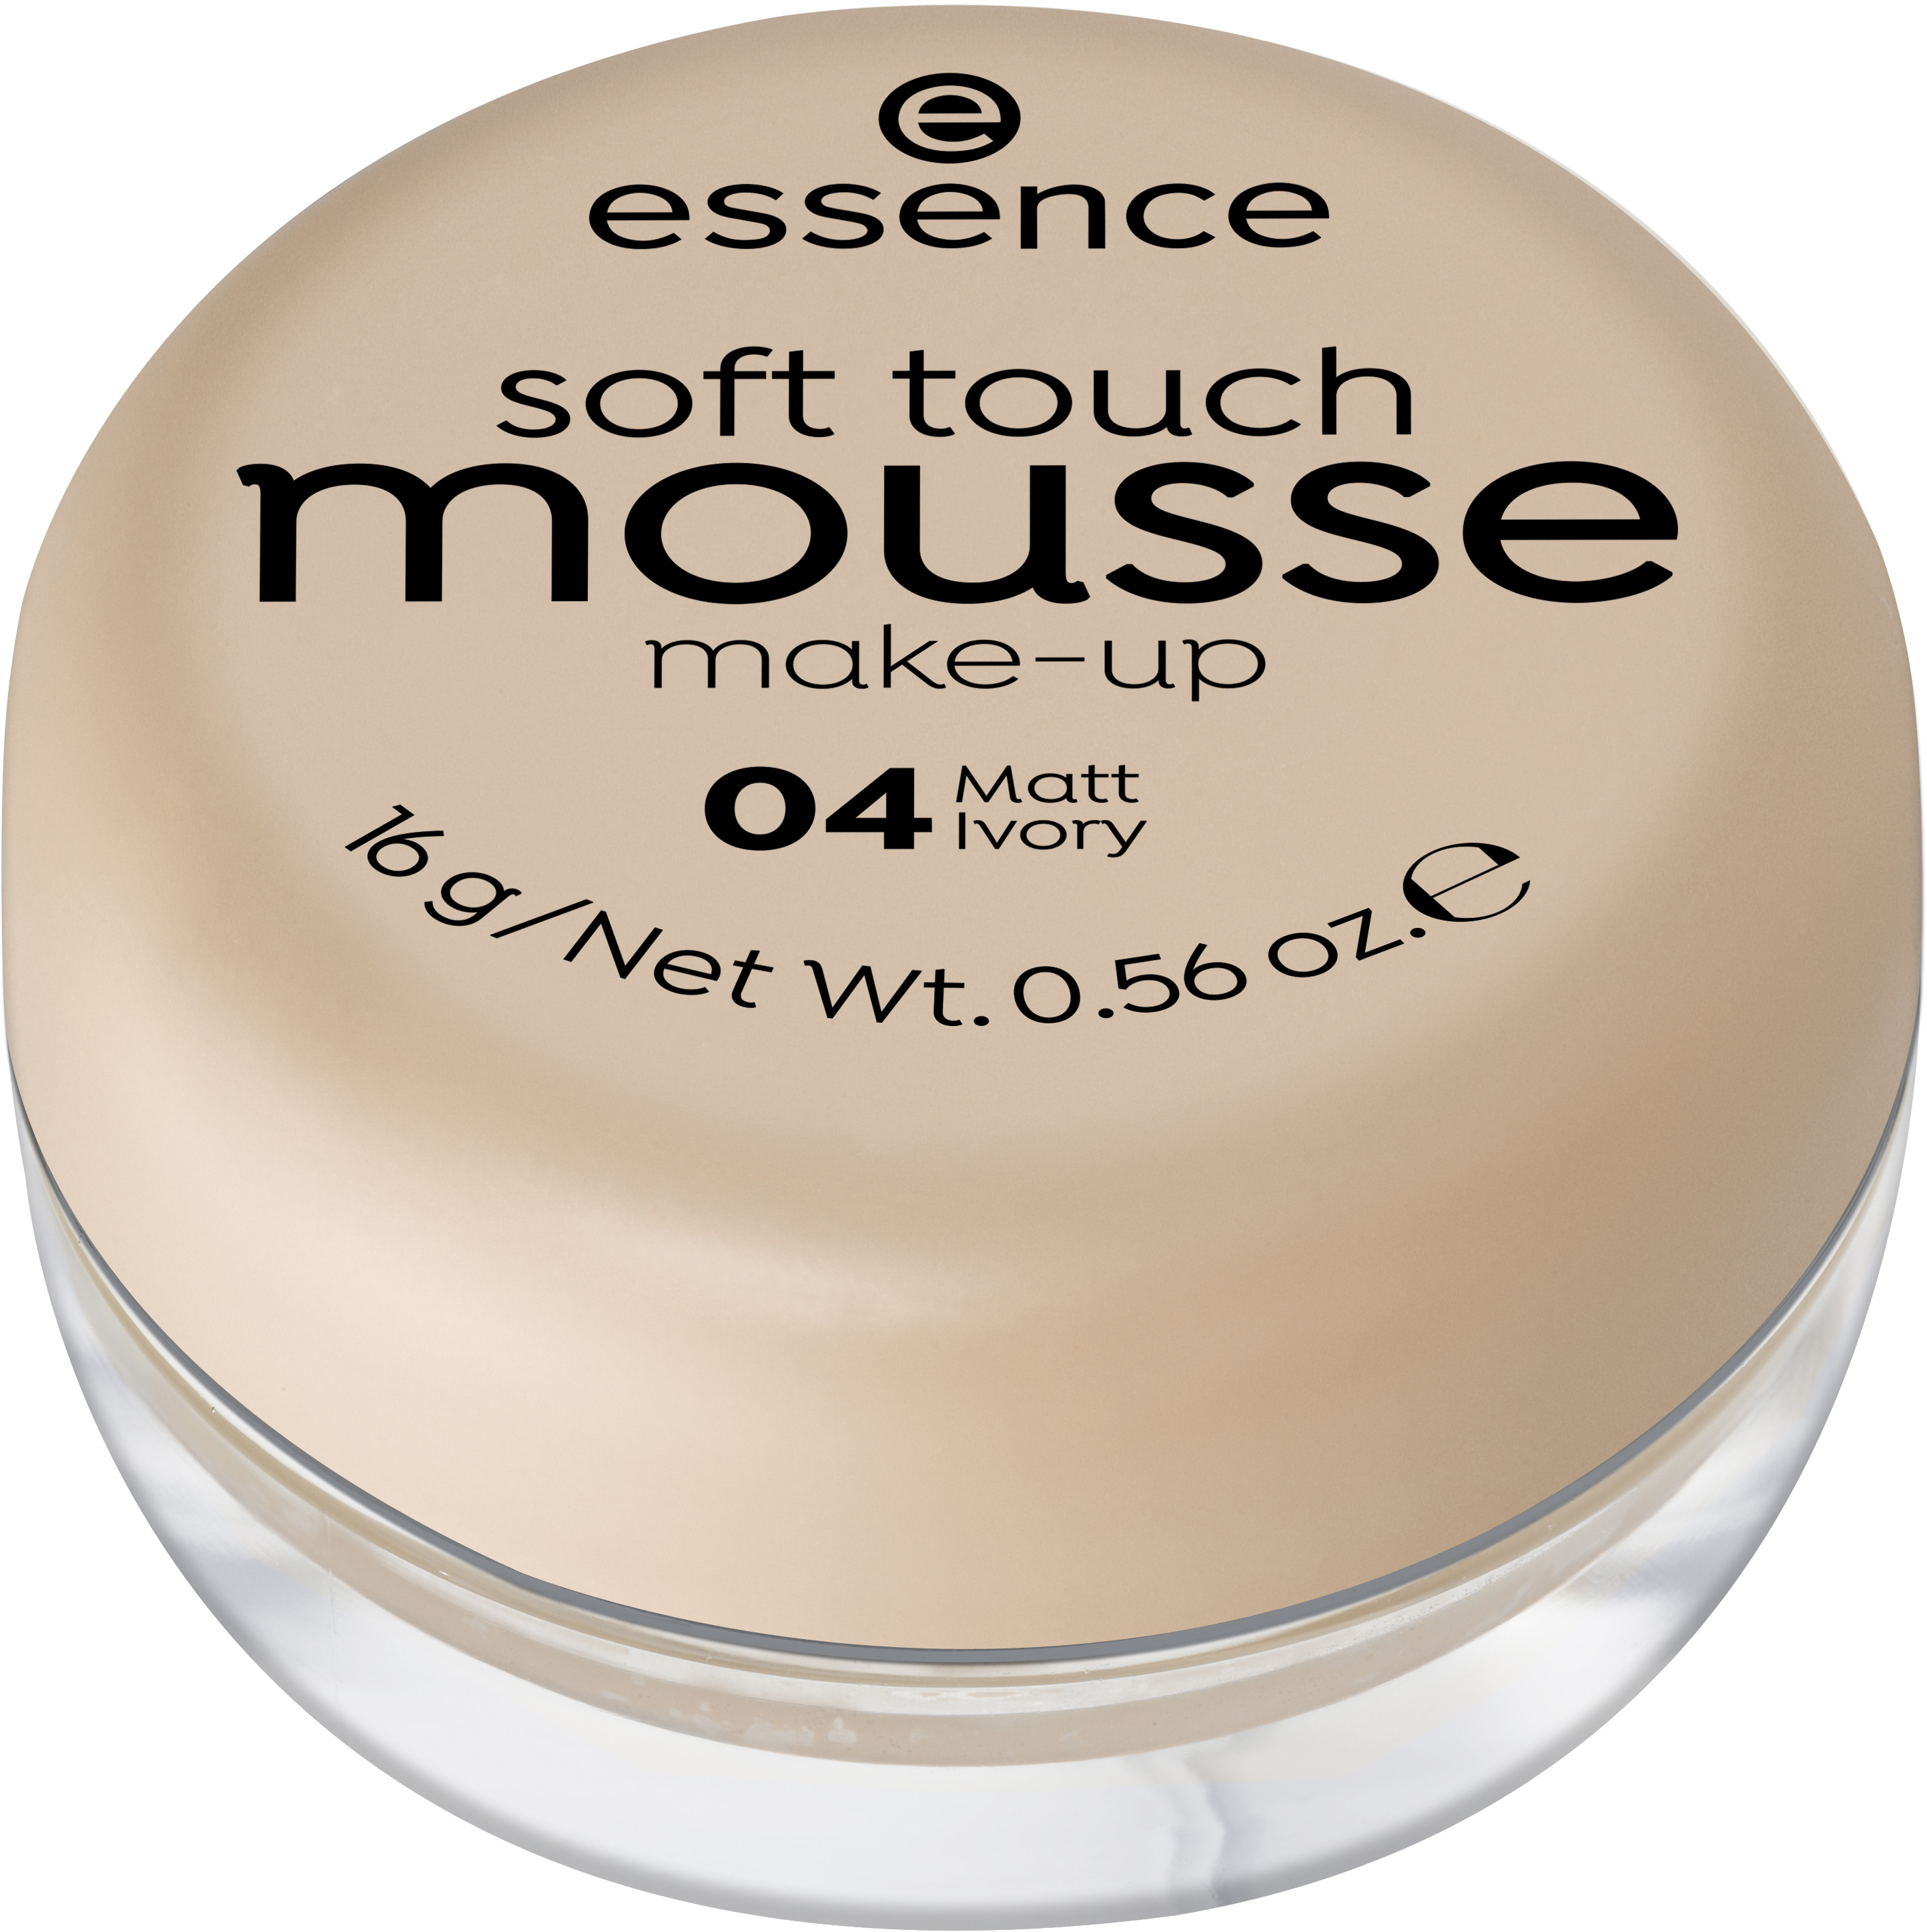 Essence soft touch mousse make-up 0 4